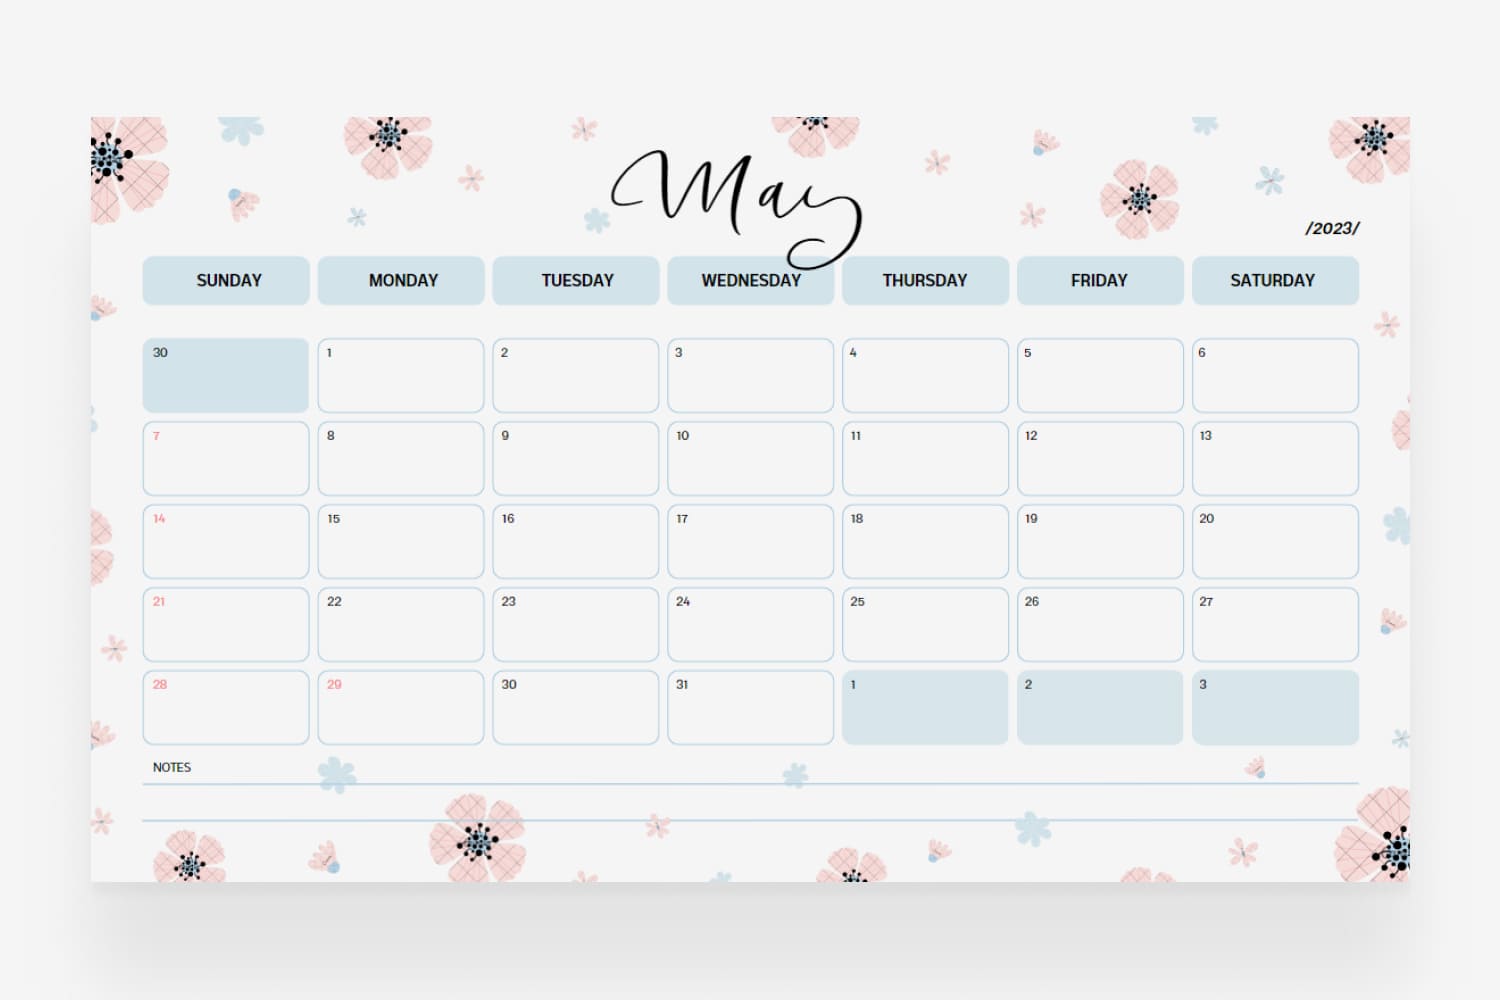 May aesthetic calendar with a beige and blue color scheme and delicate floral illustrations.